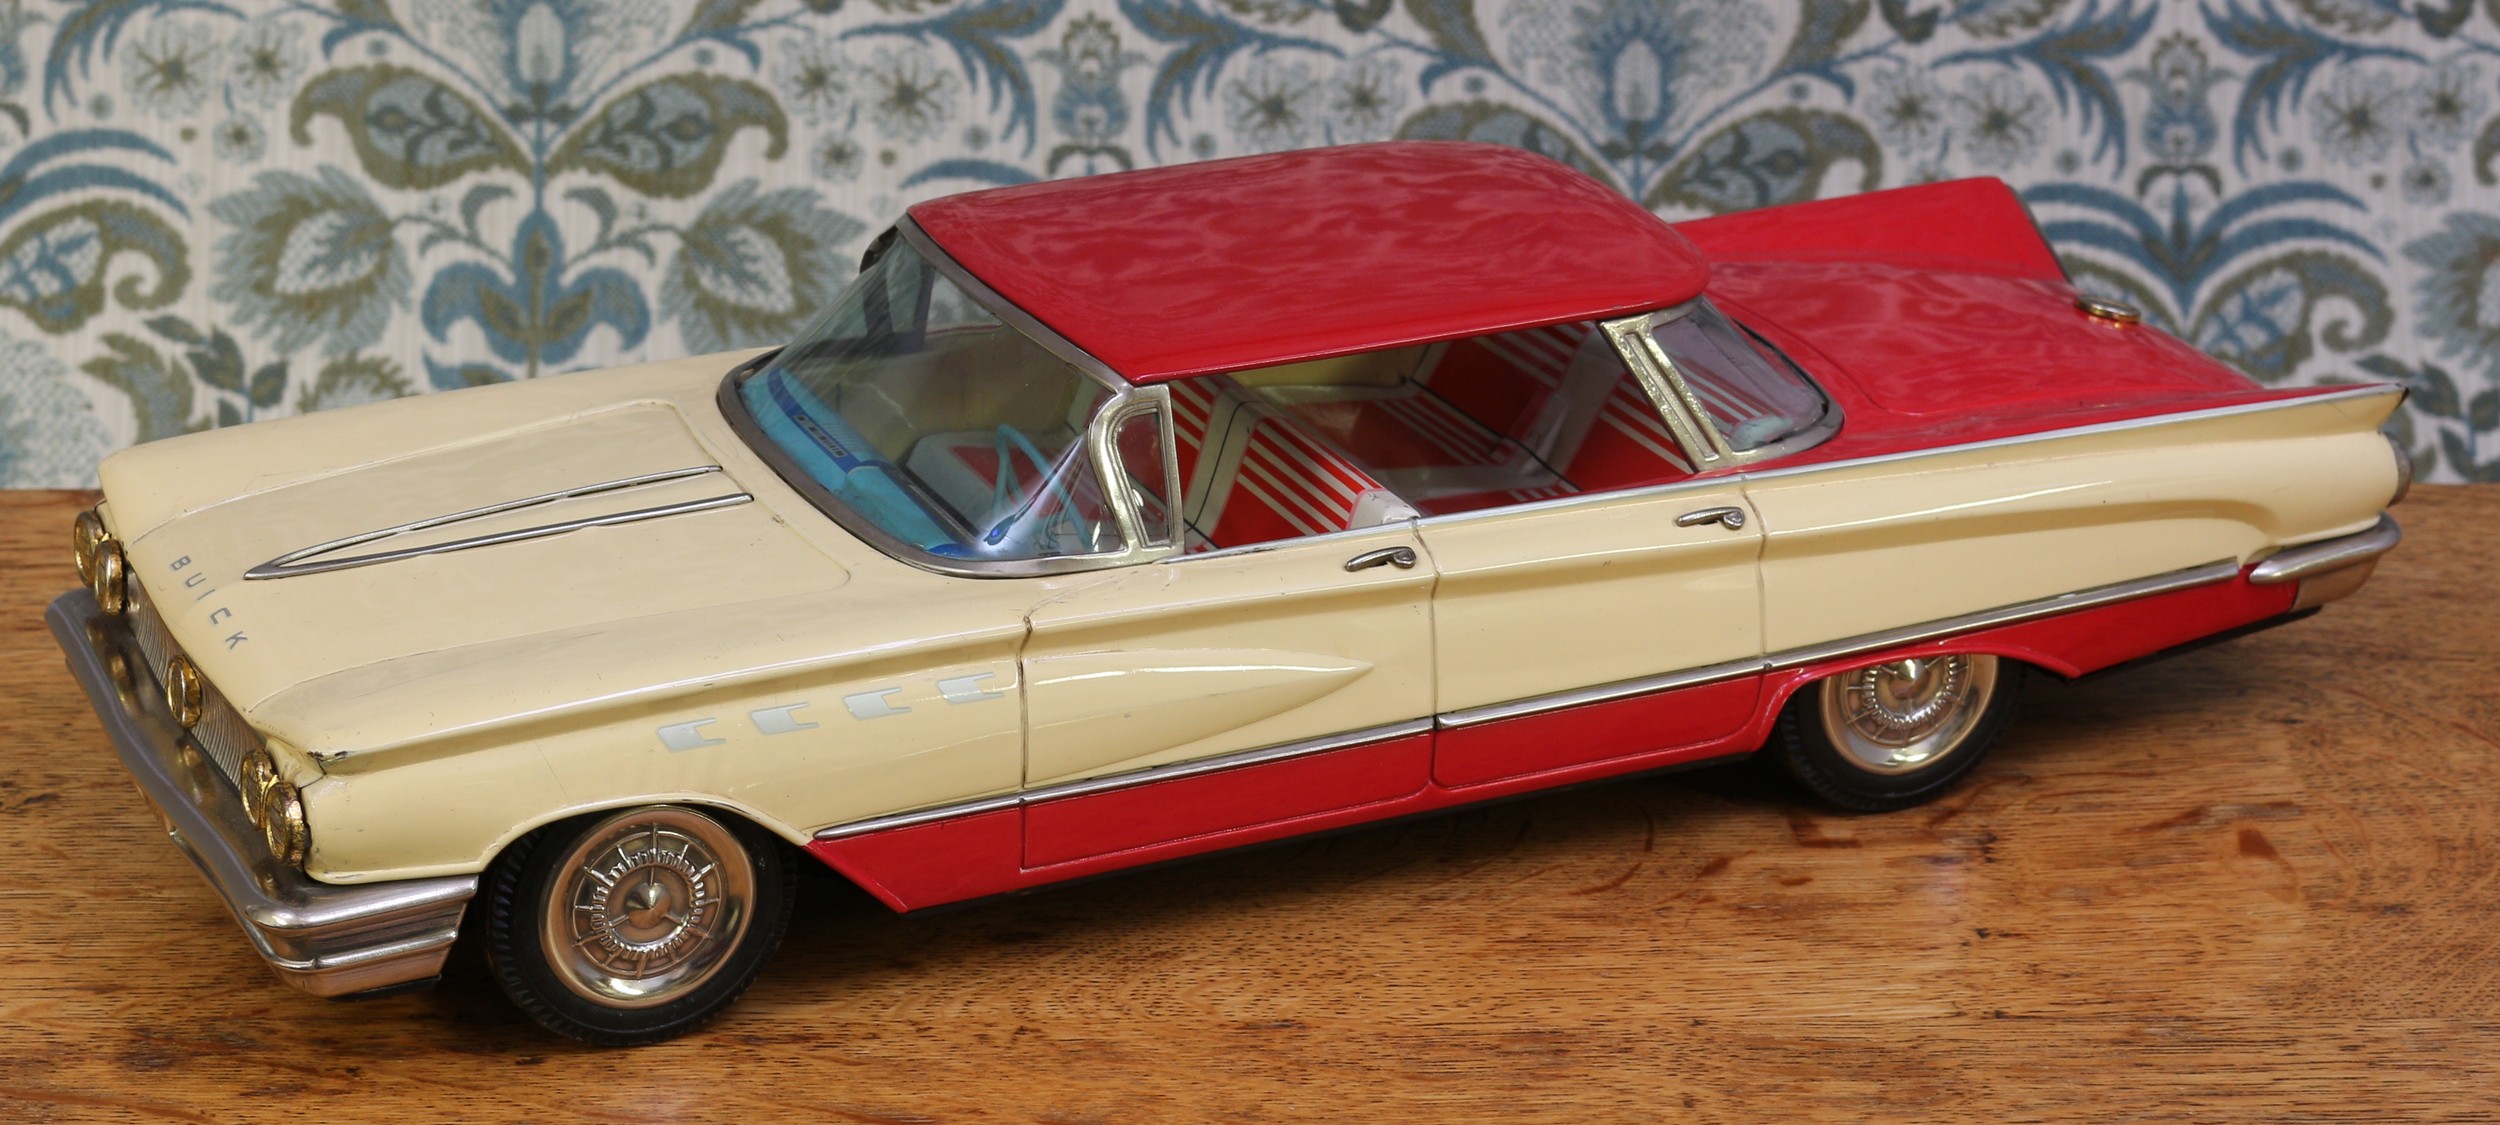 A 1960's Ichiko (Japan) tinplate and friction powered Buick, two tone red and cream body with - Image 2 of 3